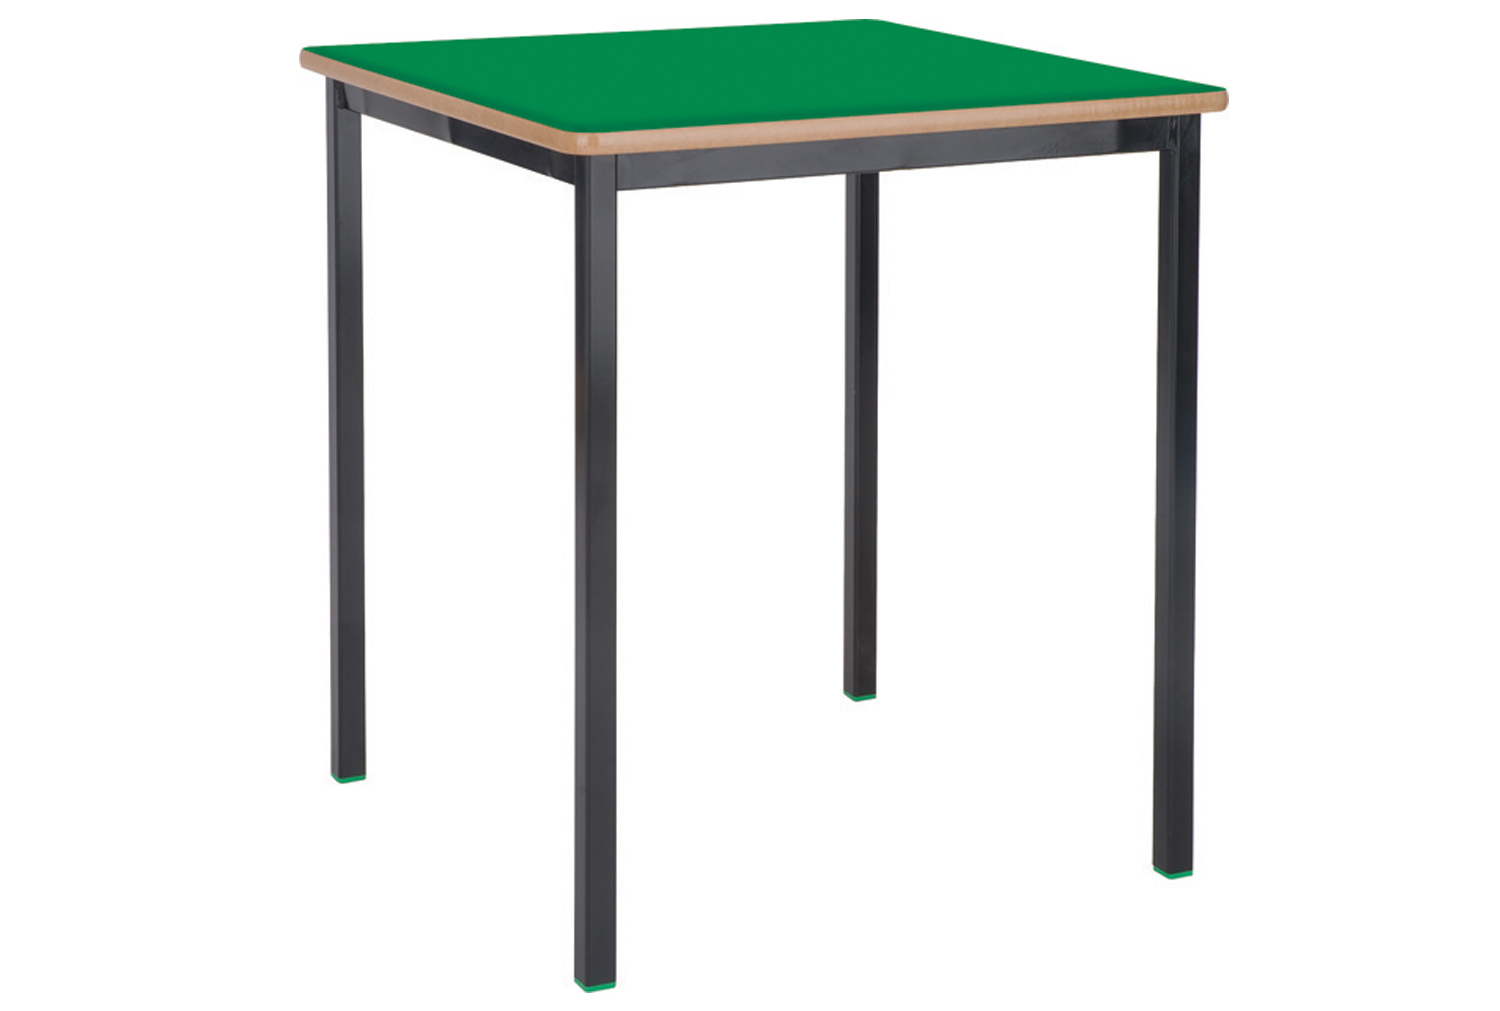 Qty 5 - Square Fully Welded Classroom Tables 11-14 Years, 55wx55dx71h (cm), Light Grey Frame, Beech Top, PU Charcoal Edge